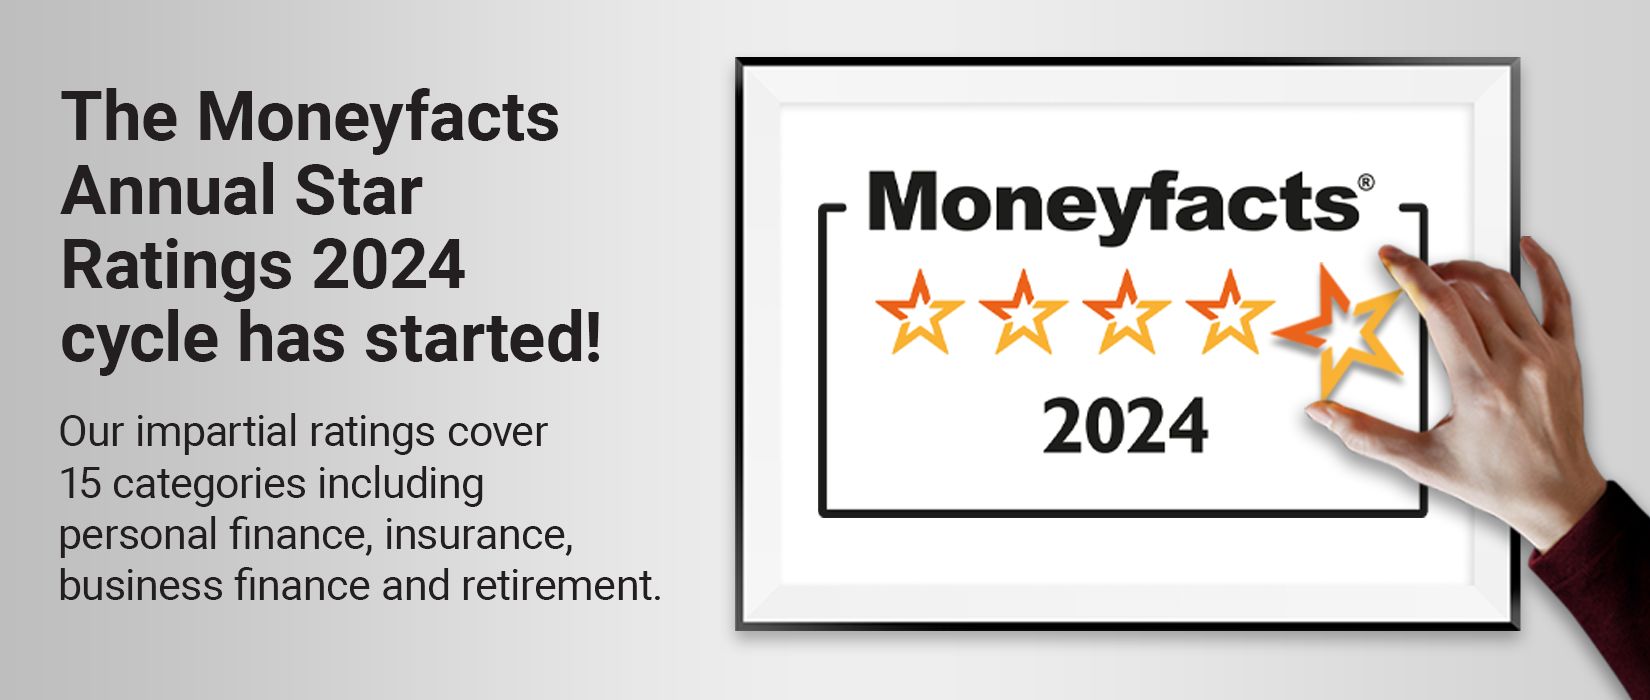 Moneyfacts Annual Star Ratings Cycle 2024